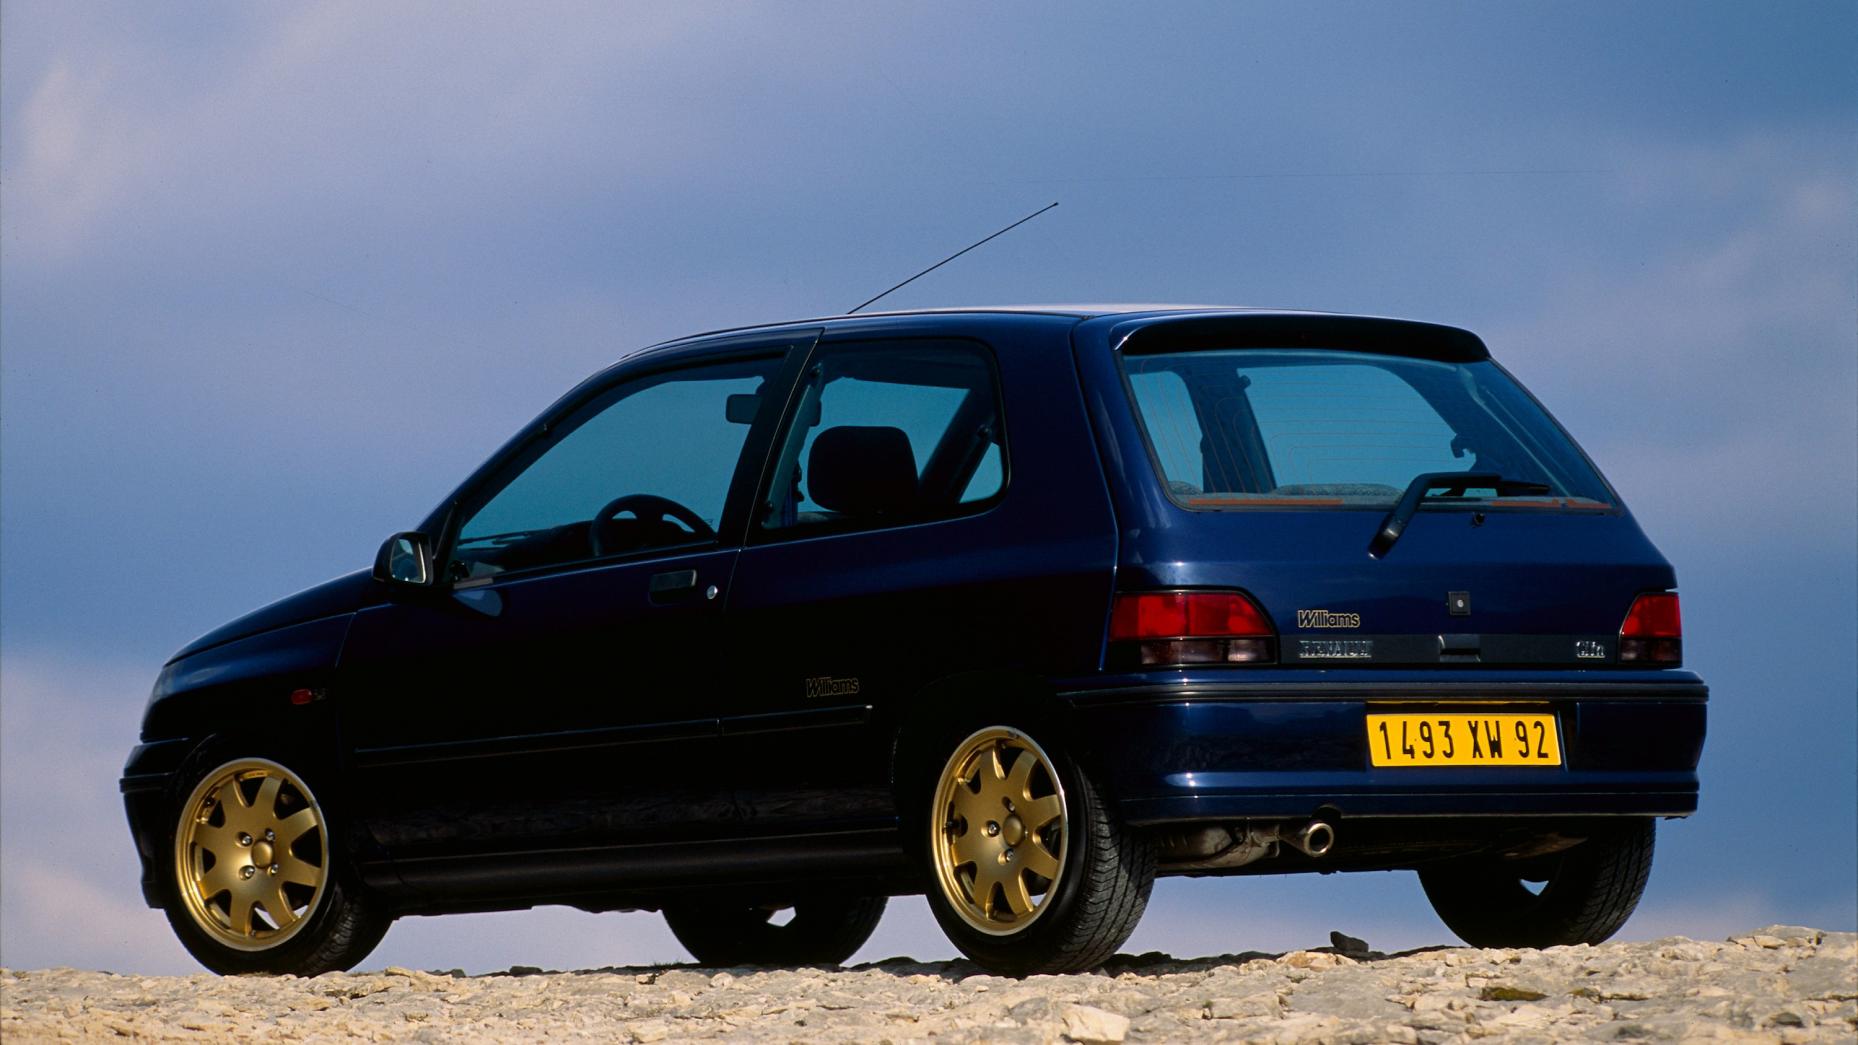 The 11 best hot hatches of all time